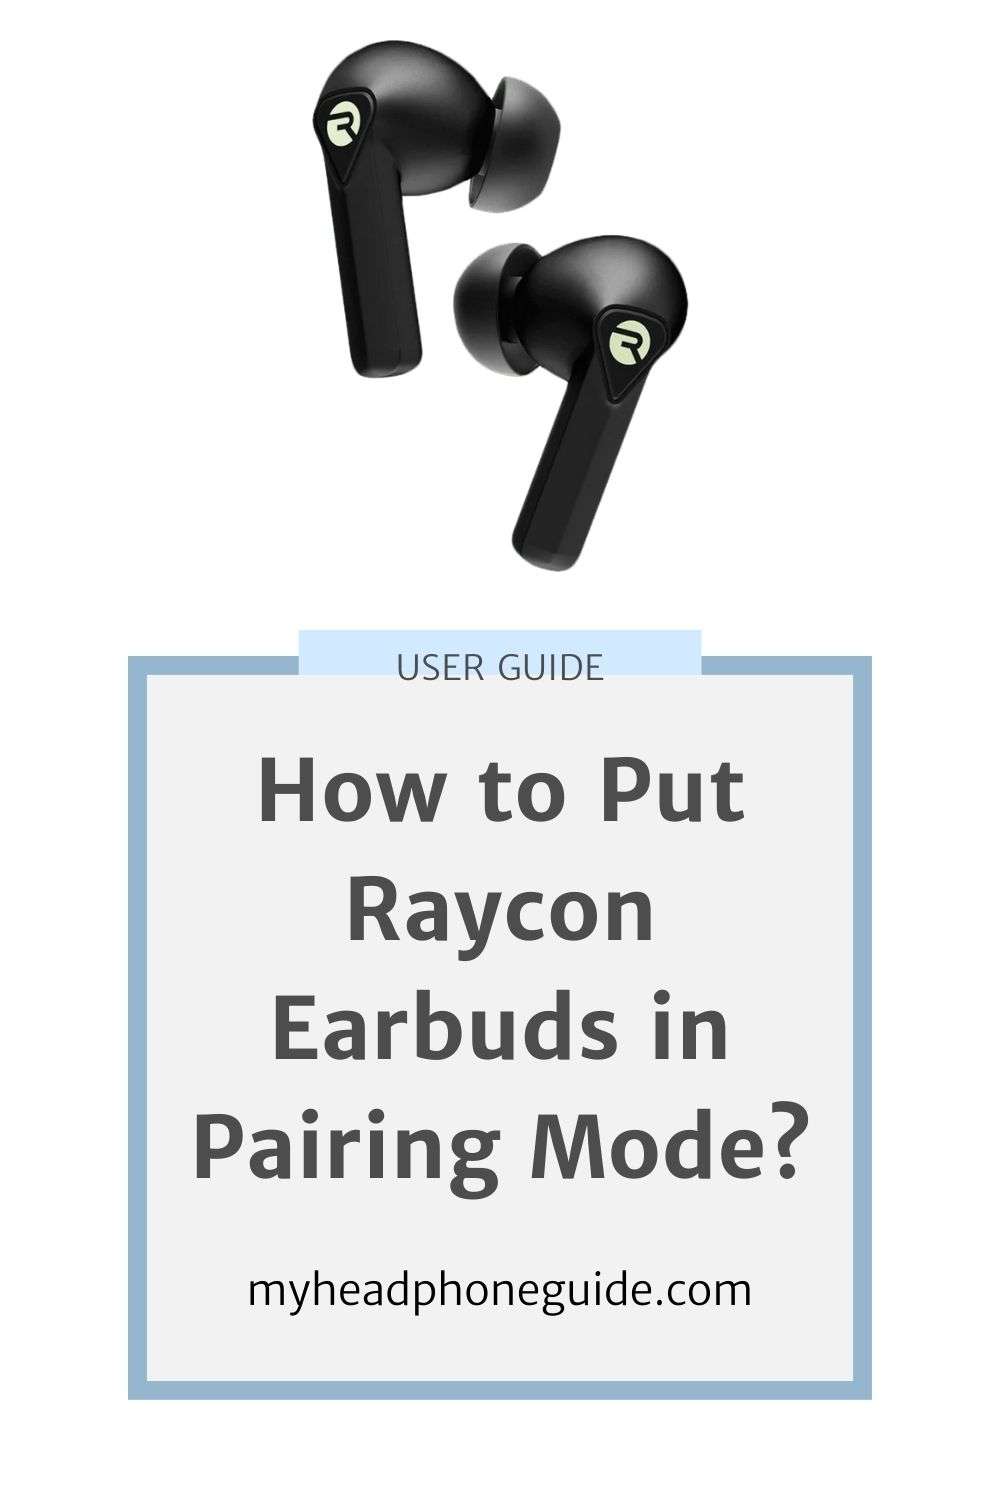 How to Put Raycon Earbuds in Pairing Mode?